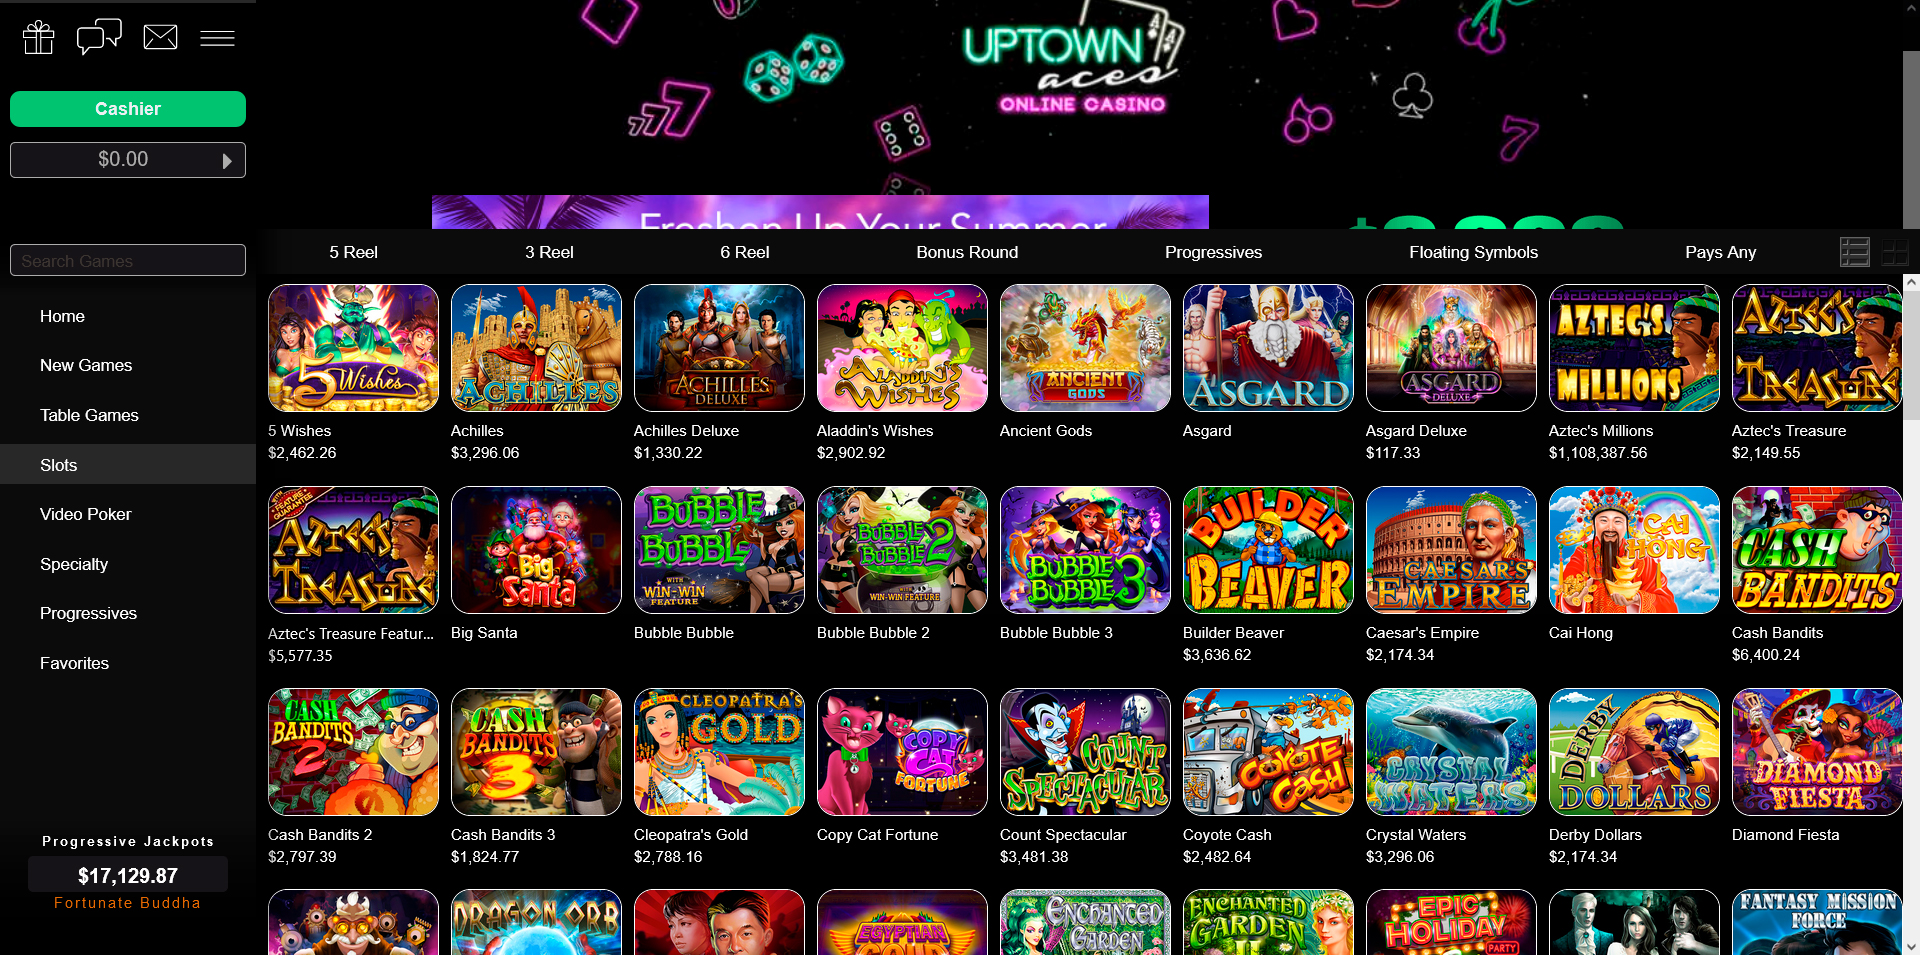 Screenshot of Game Section on Uptown Aces Casino site